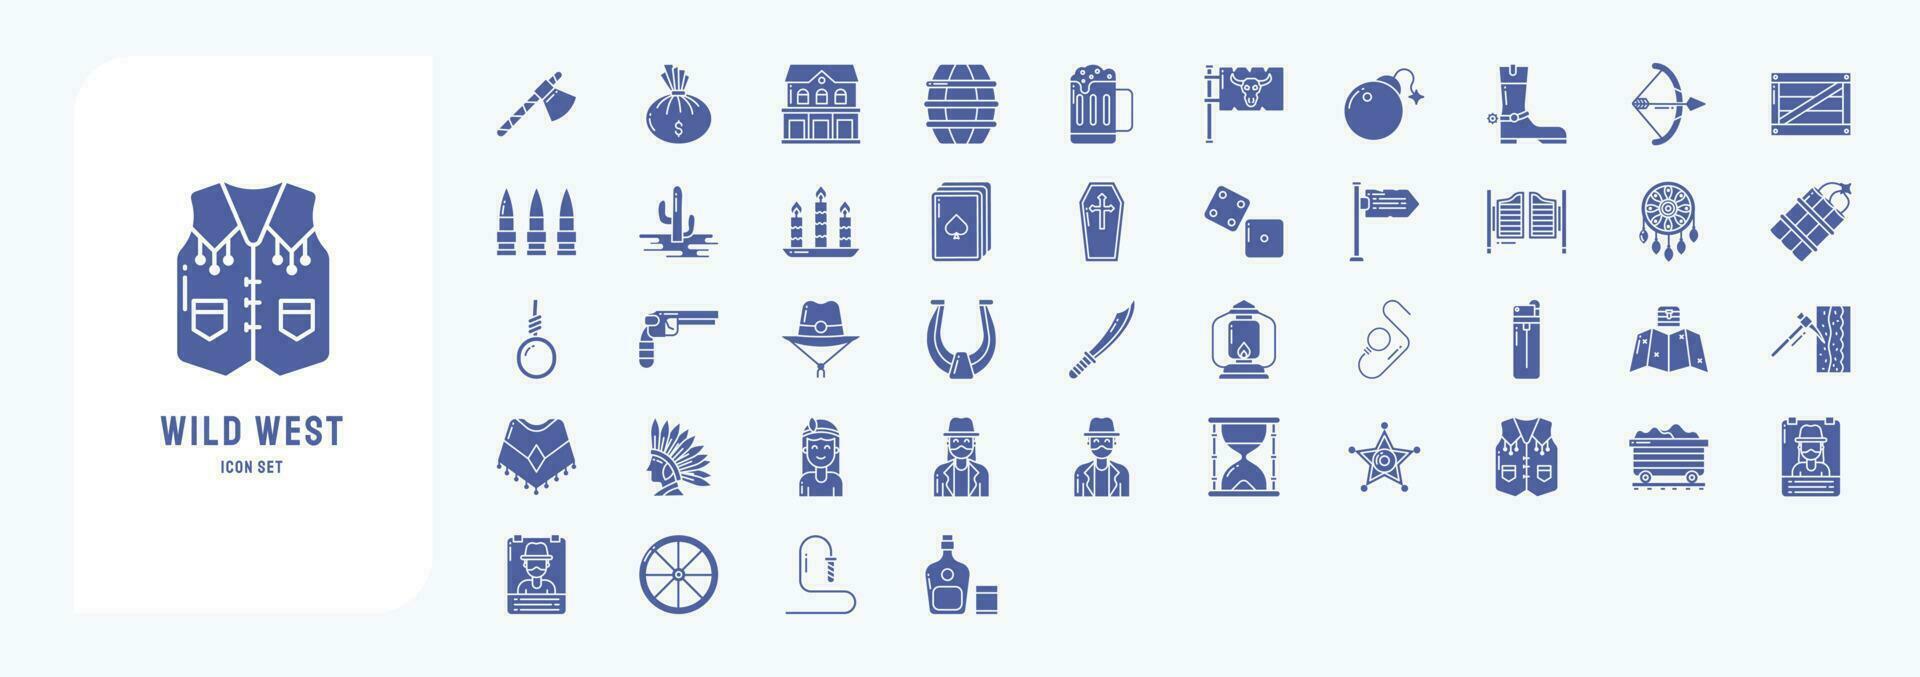 Collection of icons related to Wild west and cowboy, including icons like Gun, gallows, Horseshoe, Knife and more vector